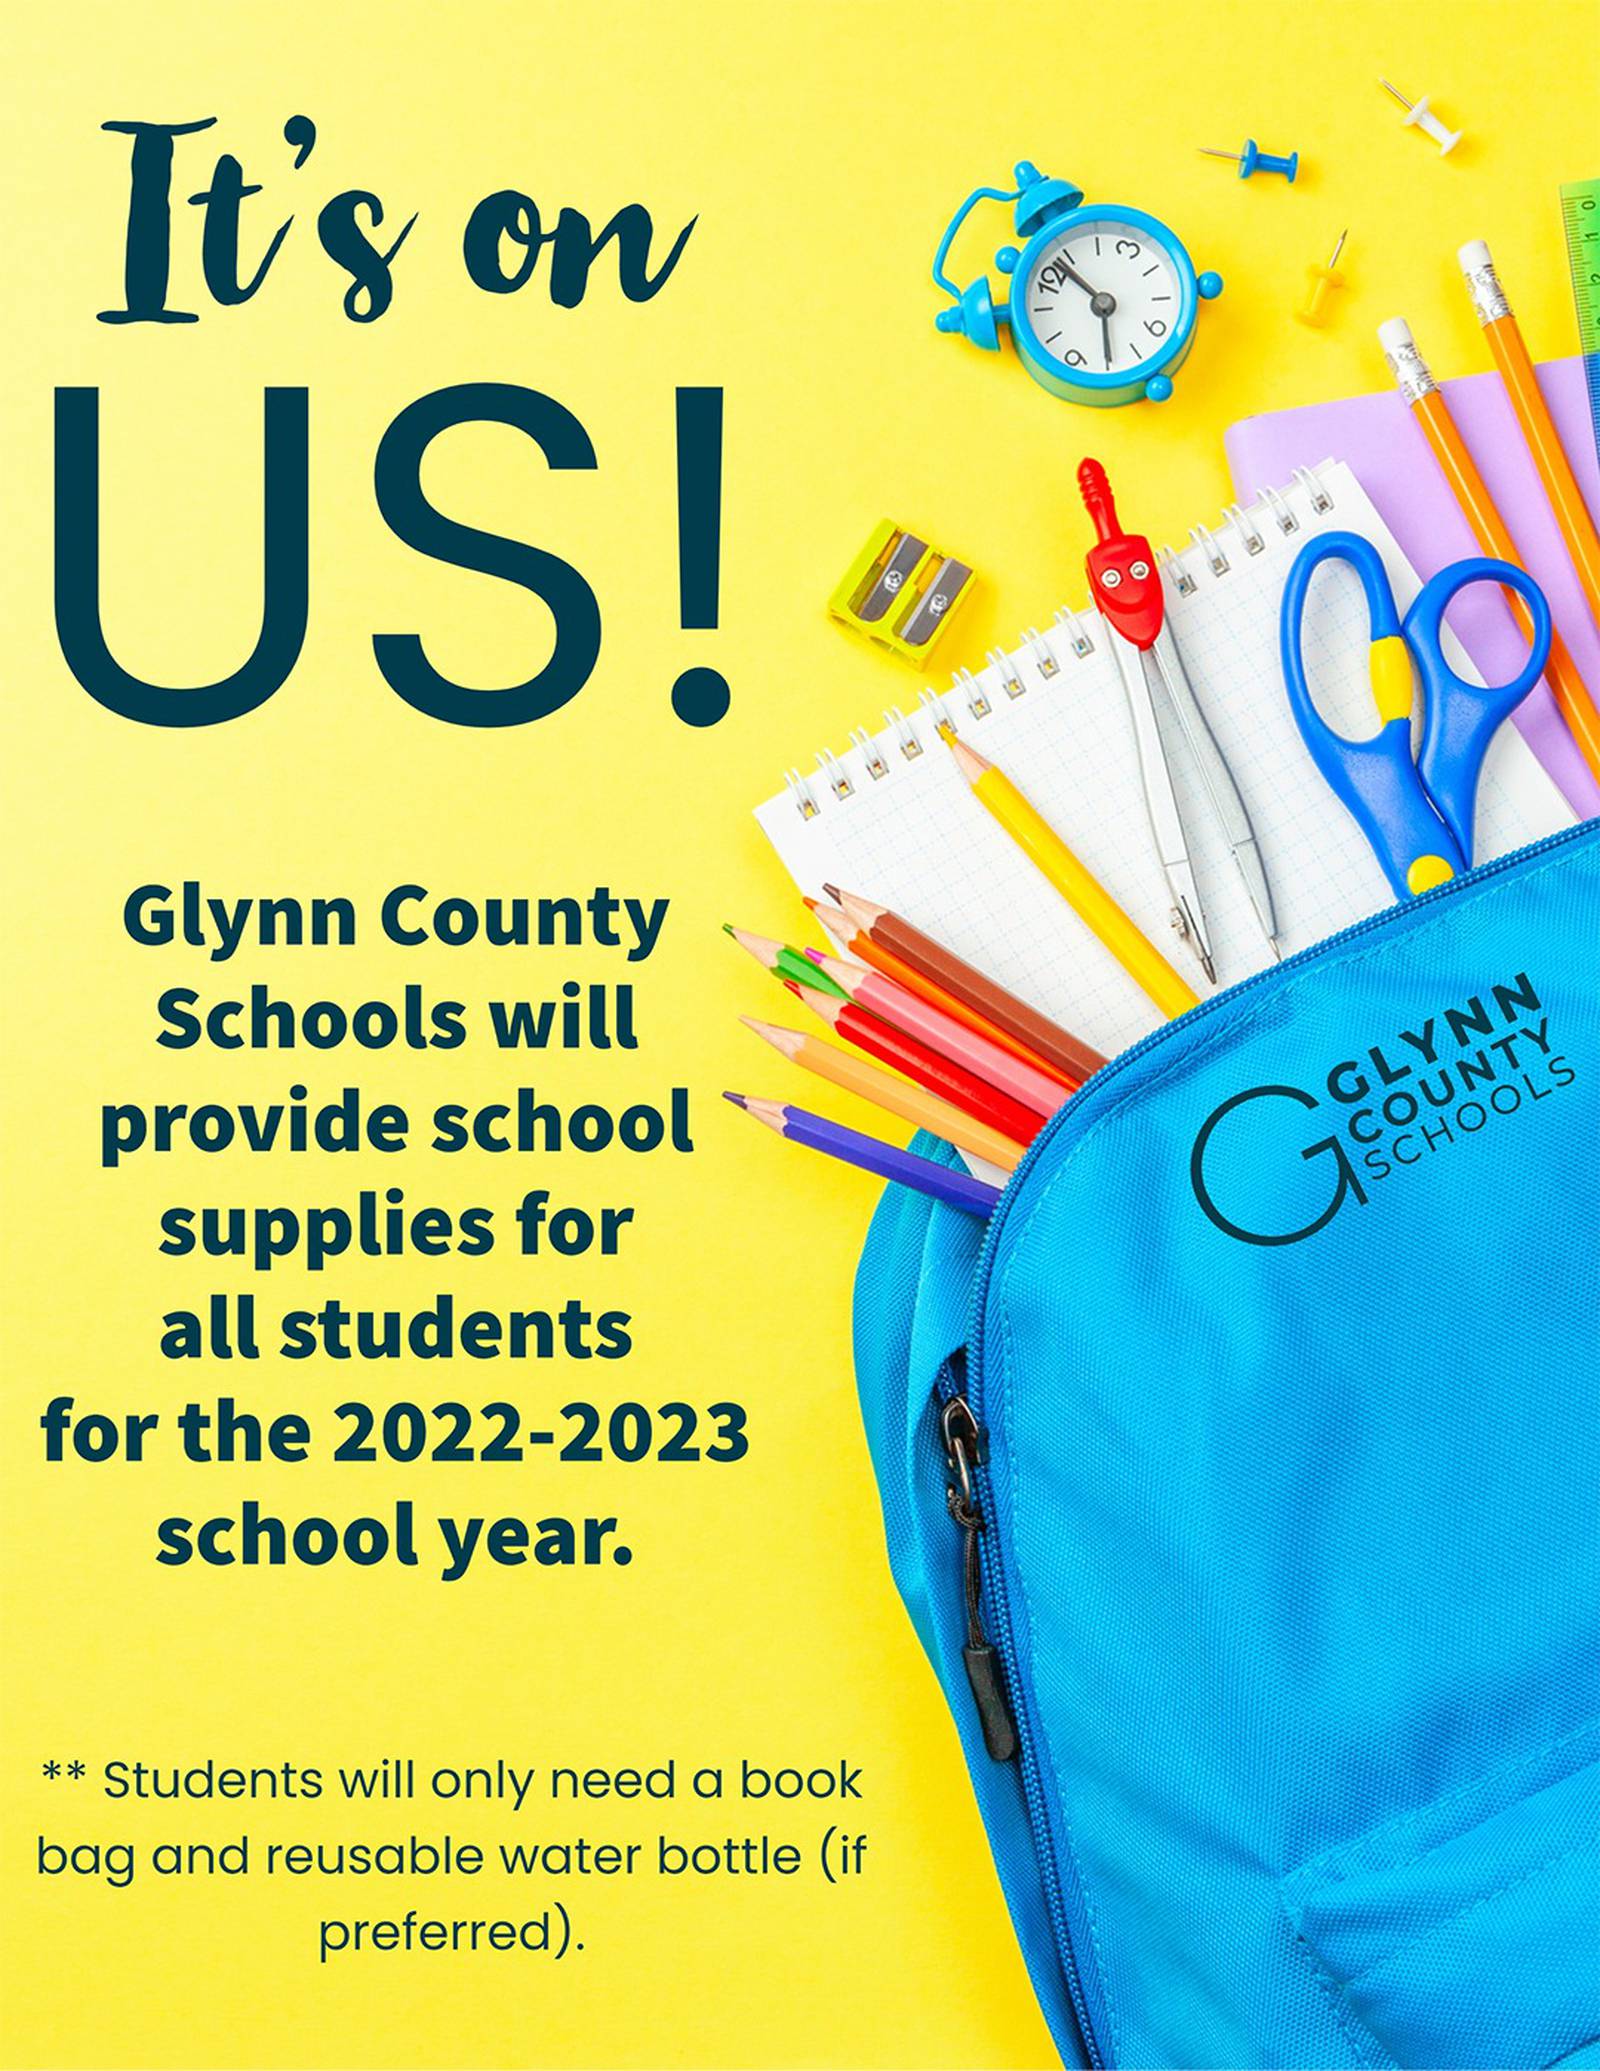 glynn-county-schools-providing-supplies-for-students-in-2022-2023-school-year-action-news-jax